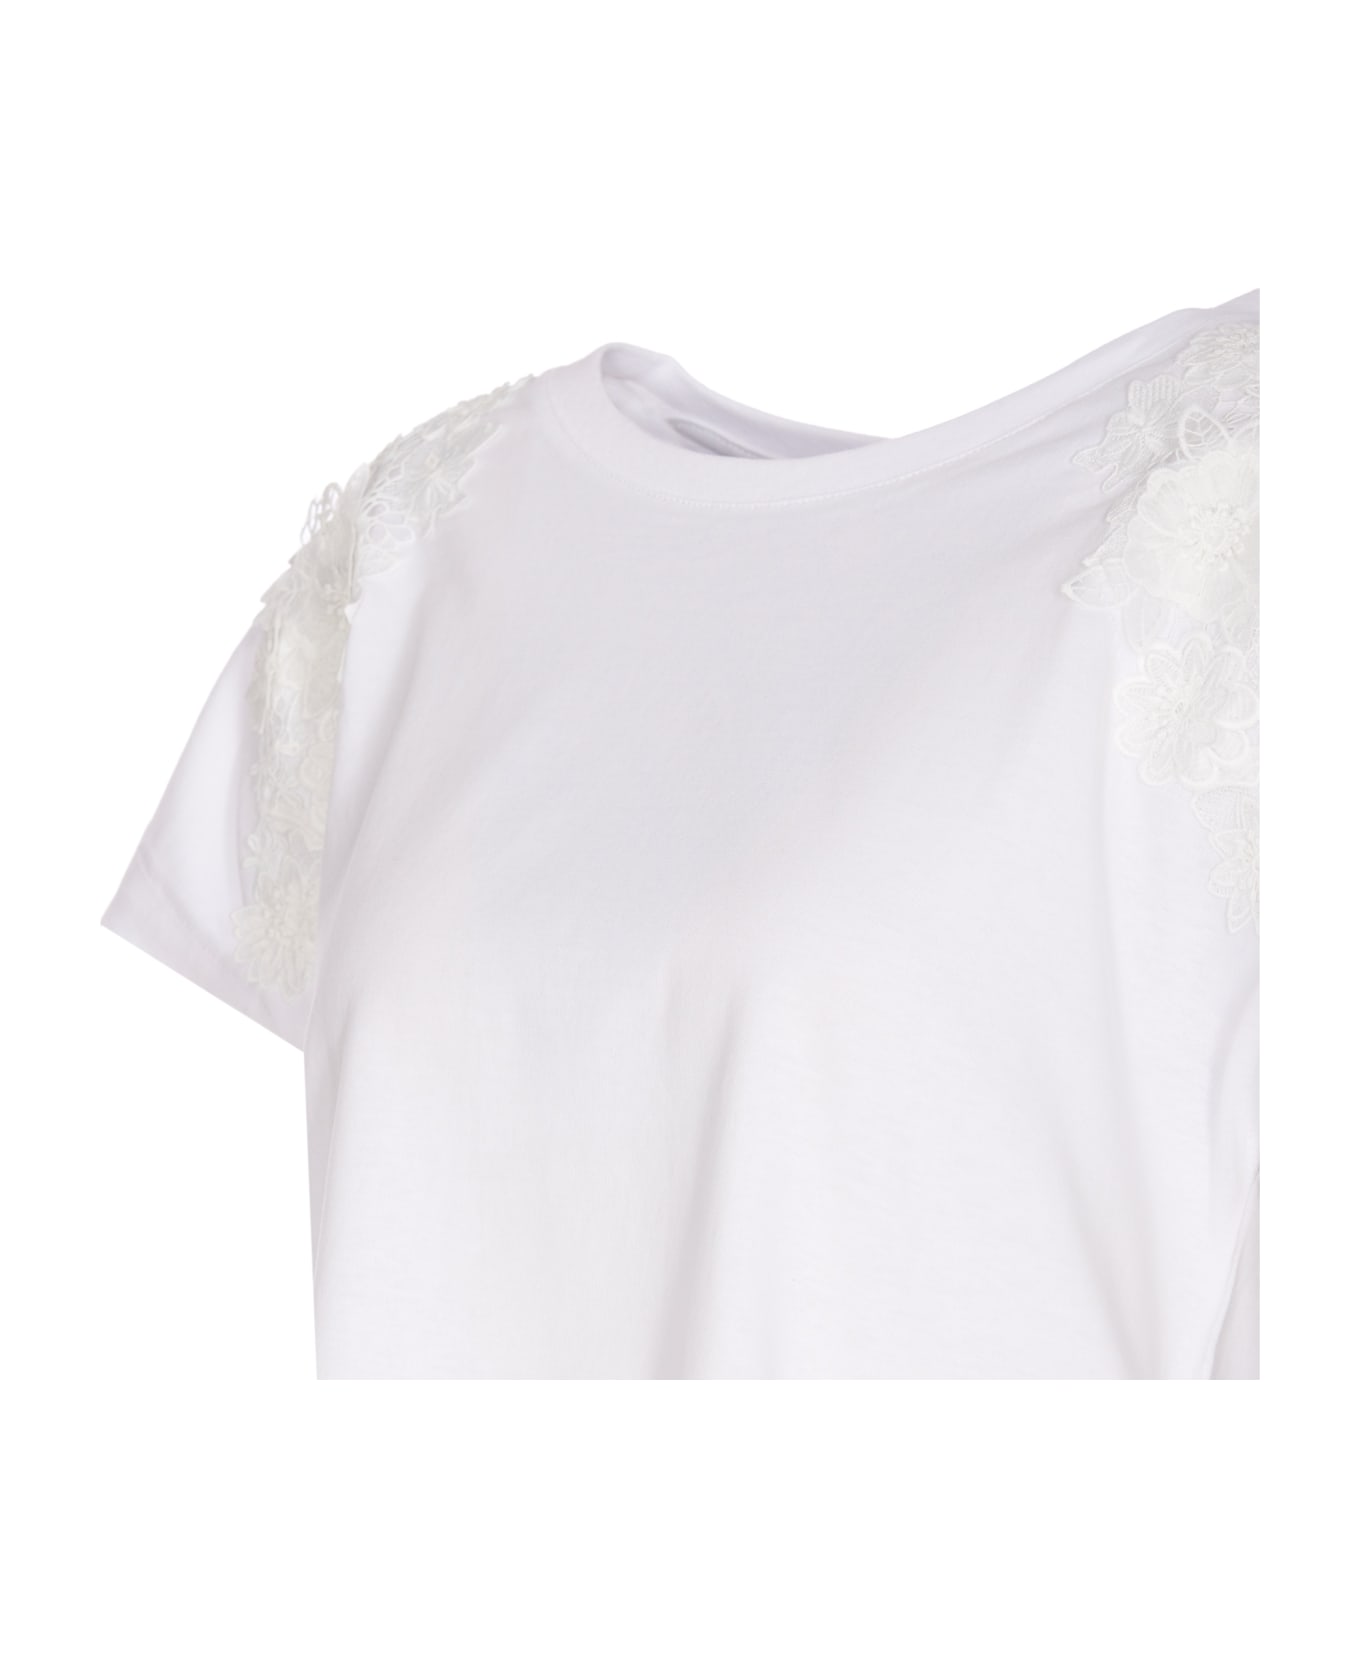 TwinSet T-shirt With Lace Details - White